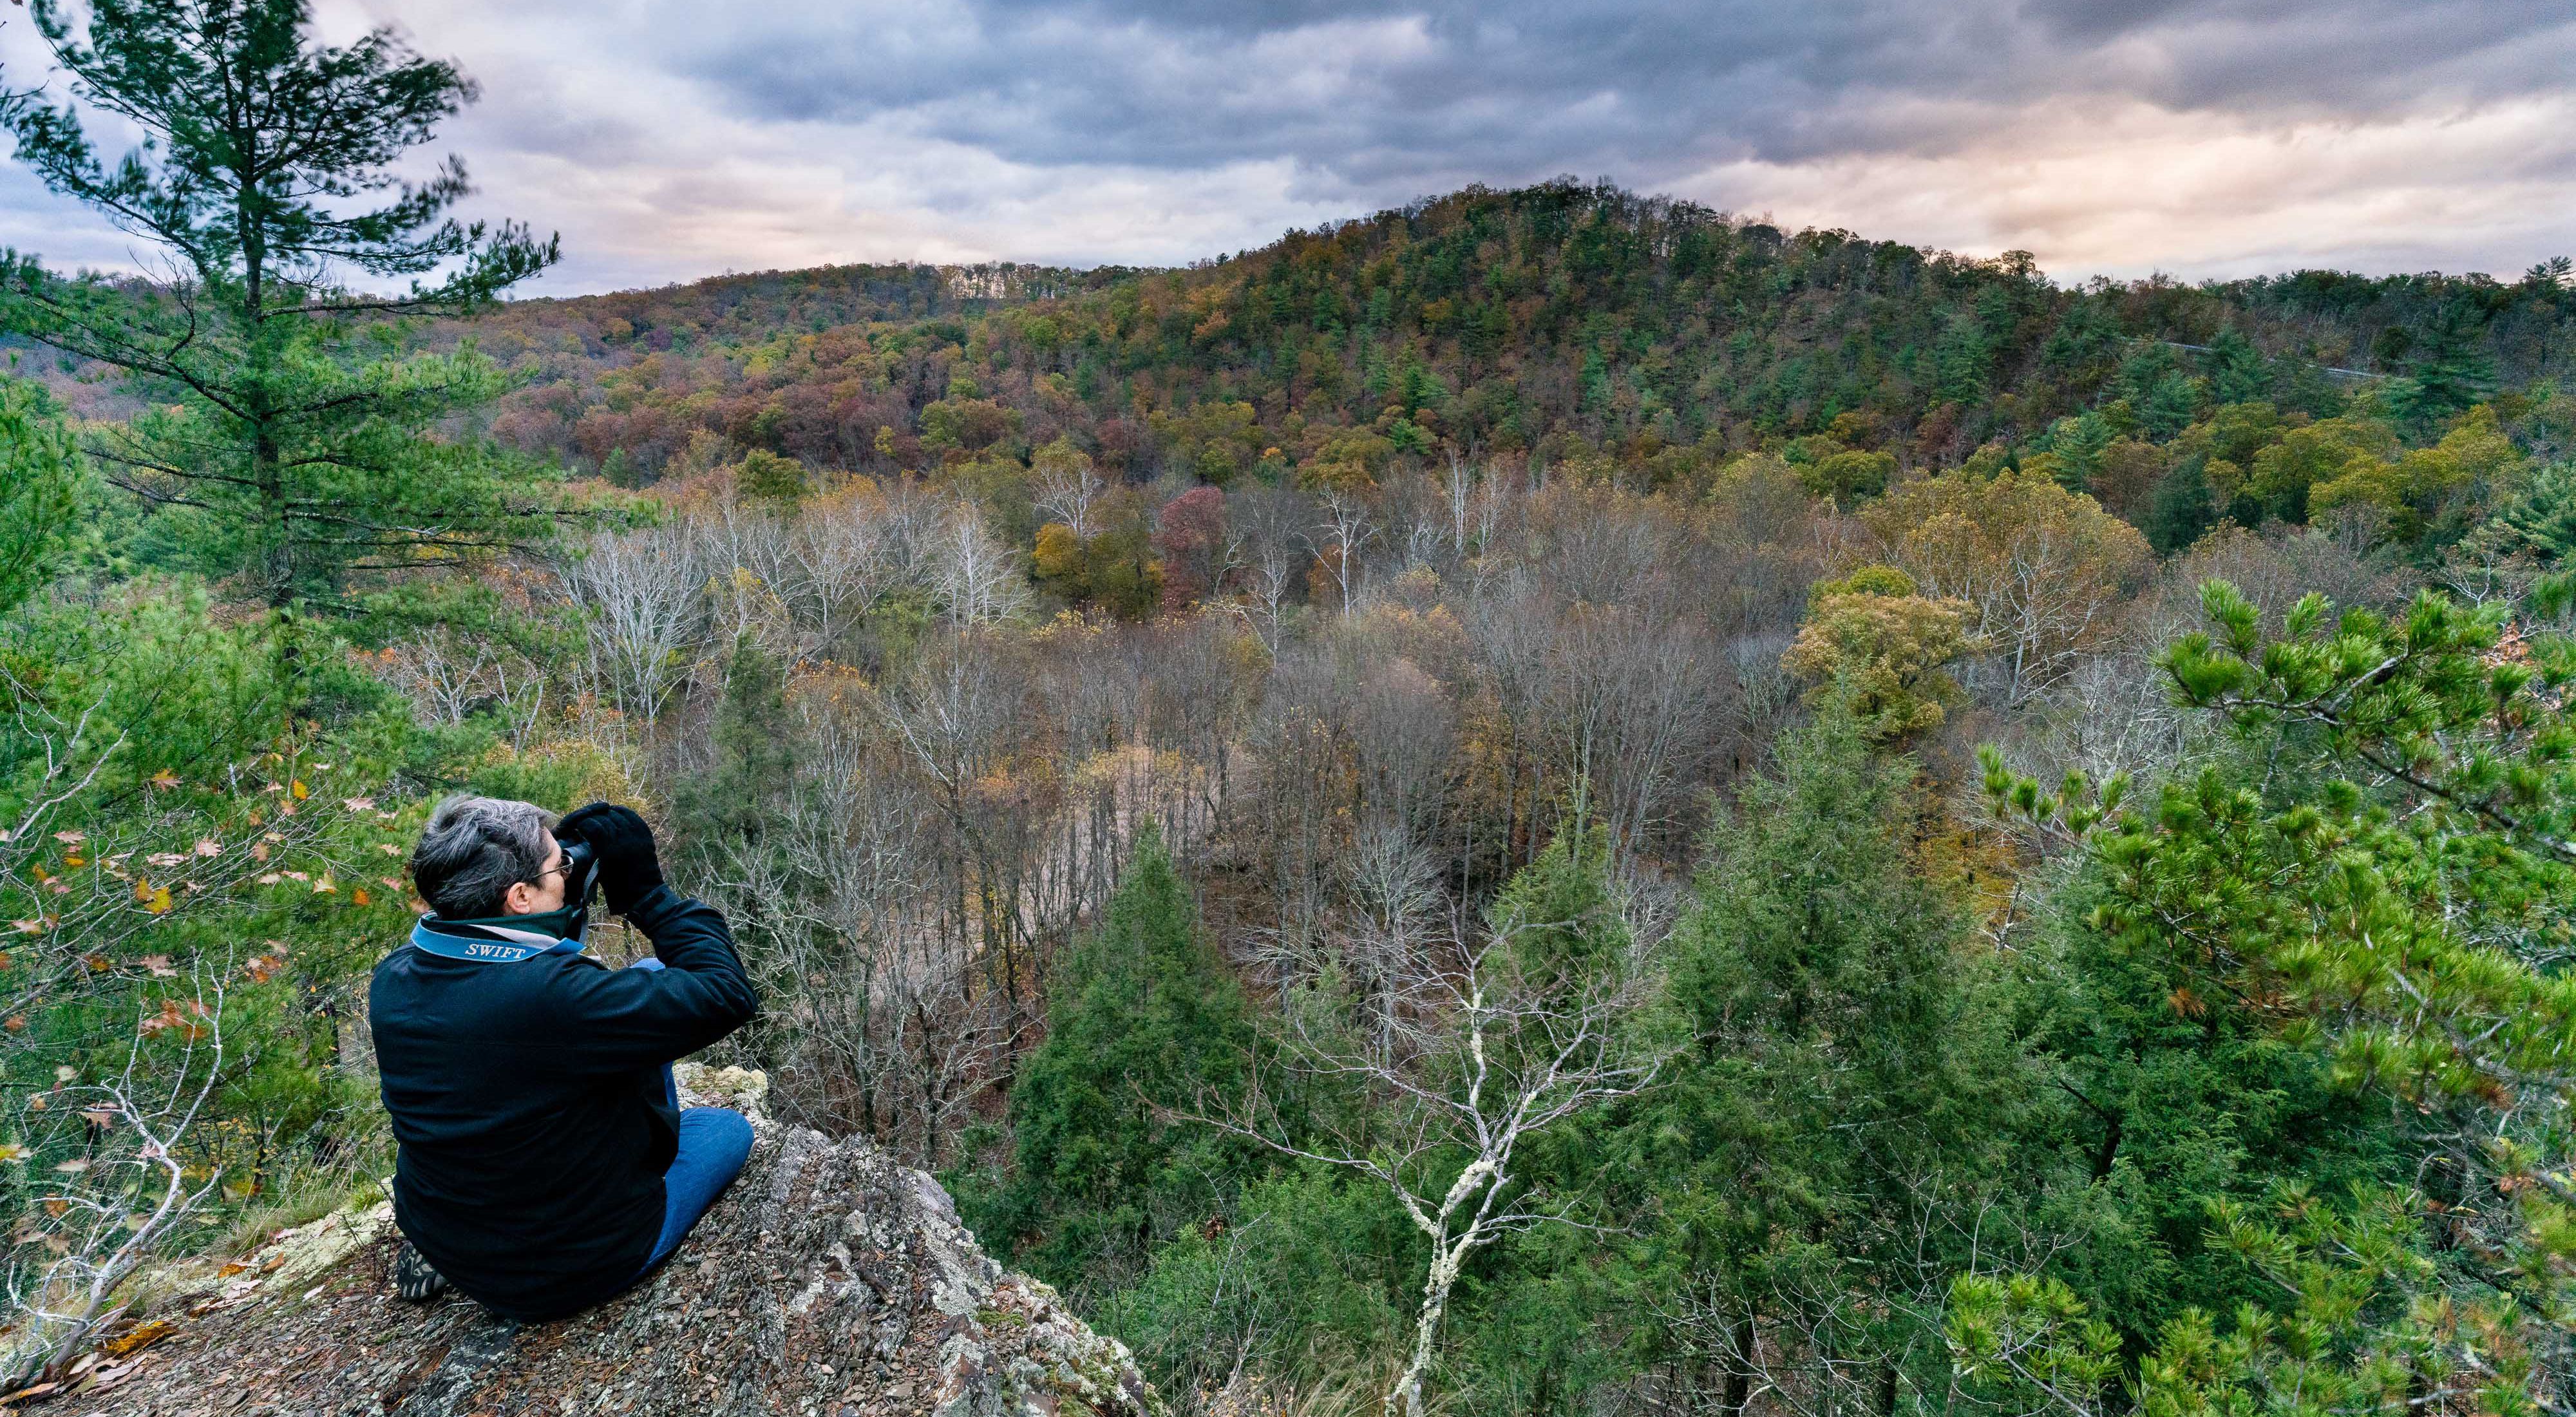 A person sits on a rock with binoculars looking at the forest.